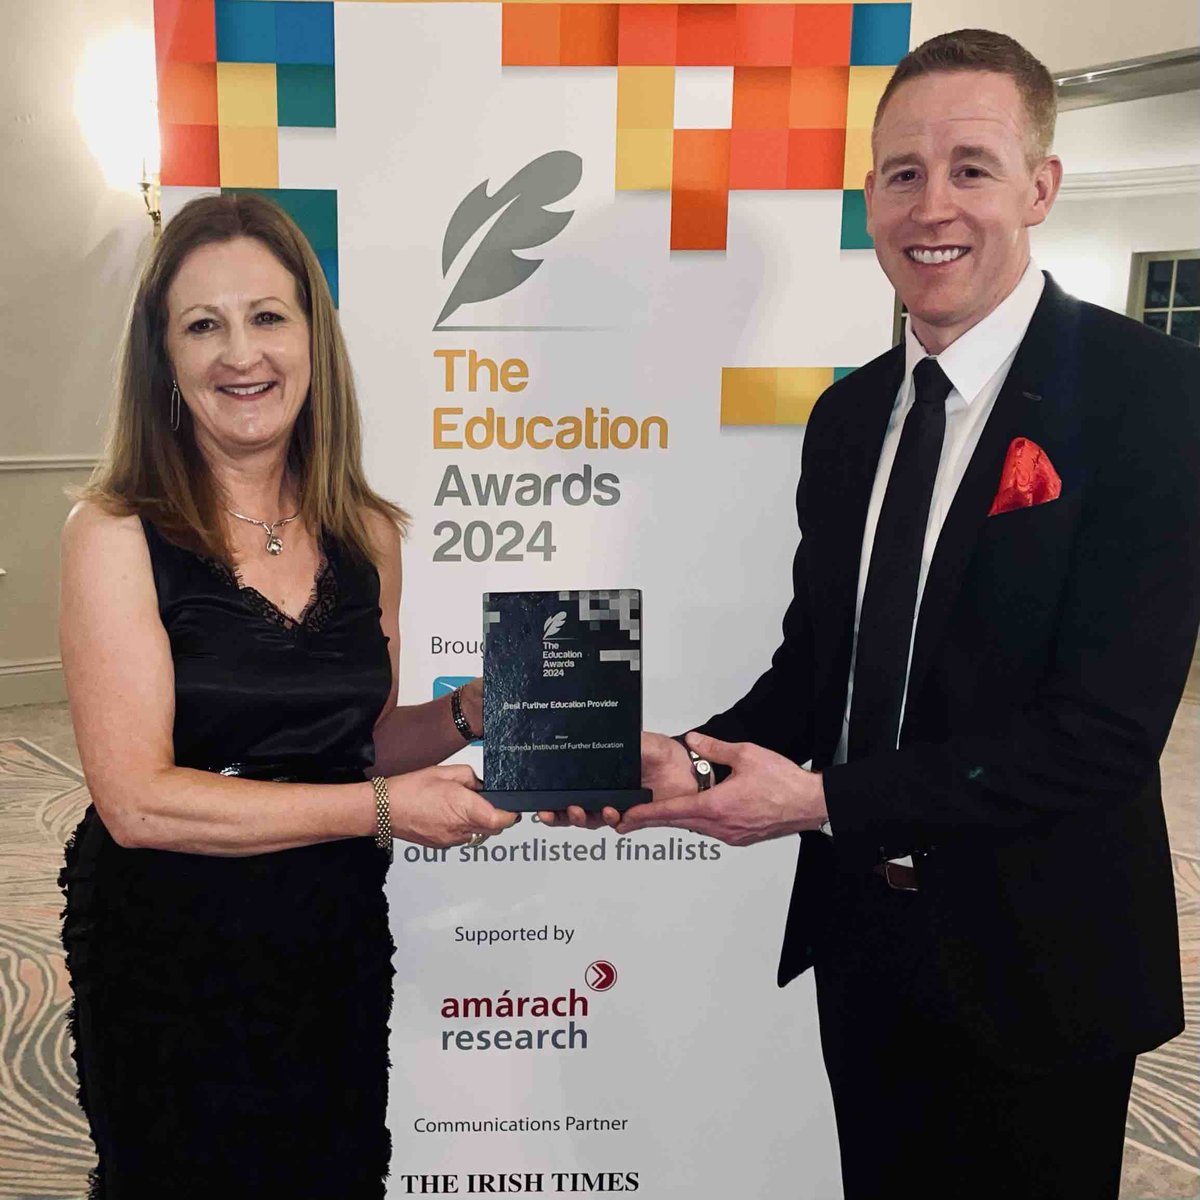 We are thrilled to have been awarded Best Further Education Provider in Ireland for 2024 last night at the The Education Awards event! A remarkable achievement and one we are incredibly proud of! #YourCollegeYourFuture